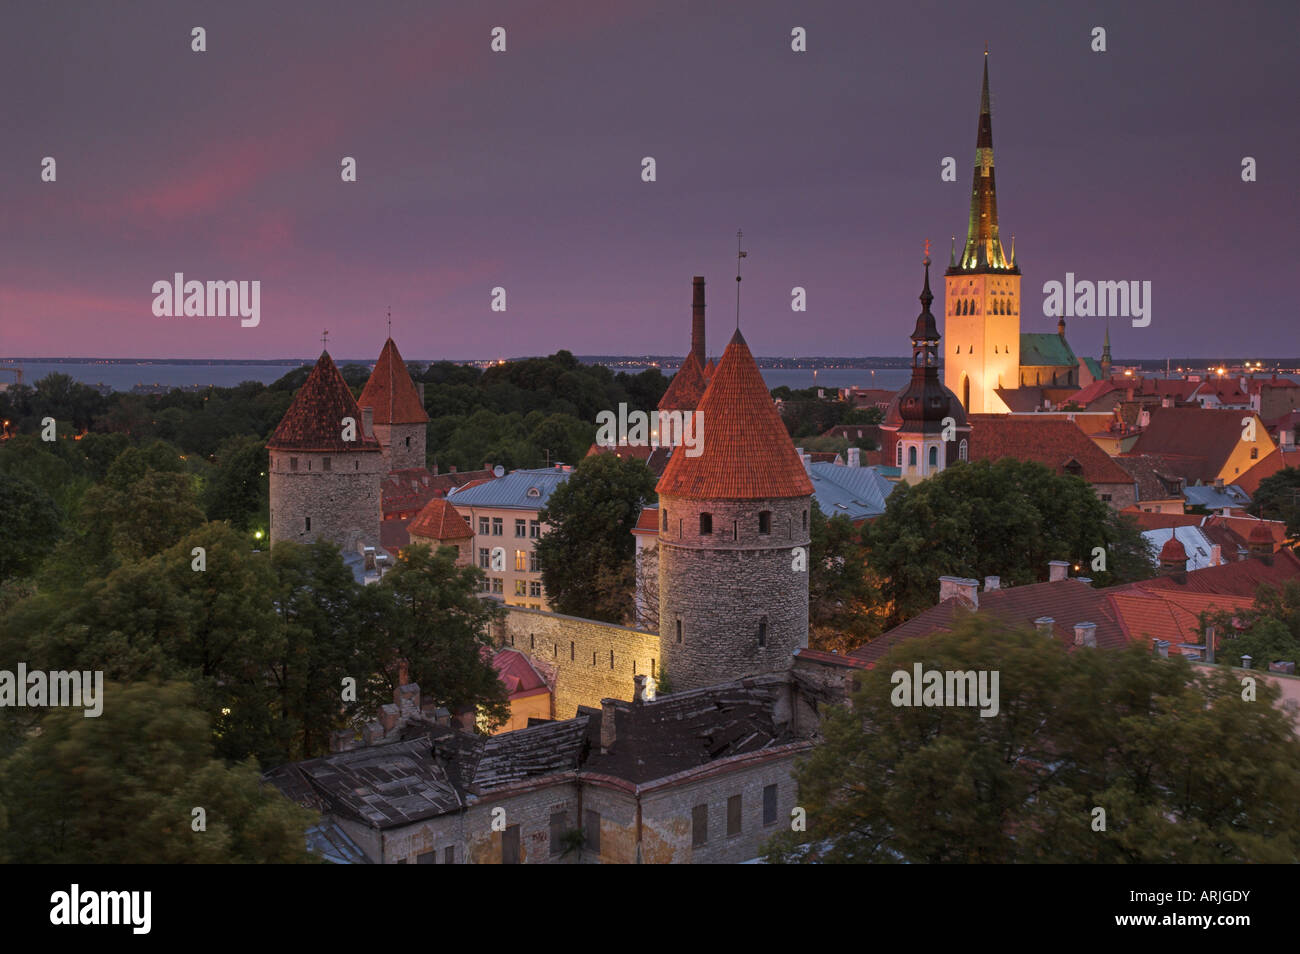 Medieval town walls, defence towers and spire of St. Olav's church at sunset, Tallinn, Estonia, Baltic States, Europe Stock Photo